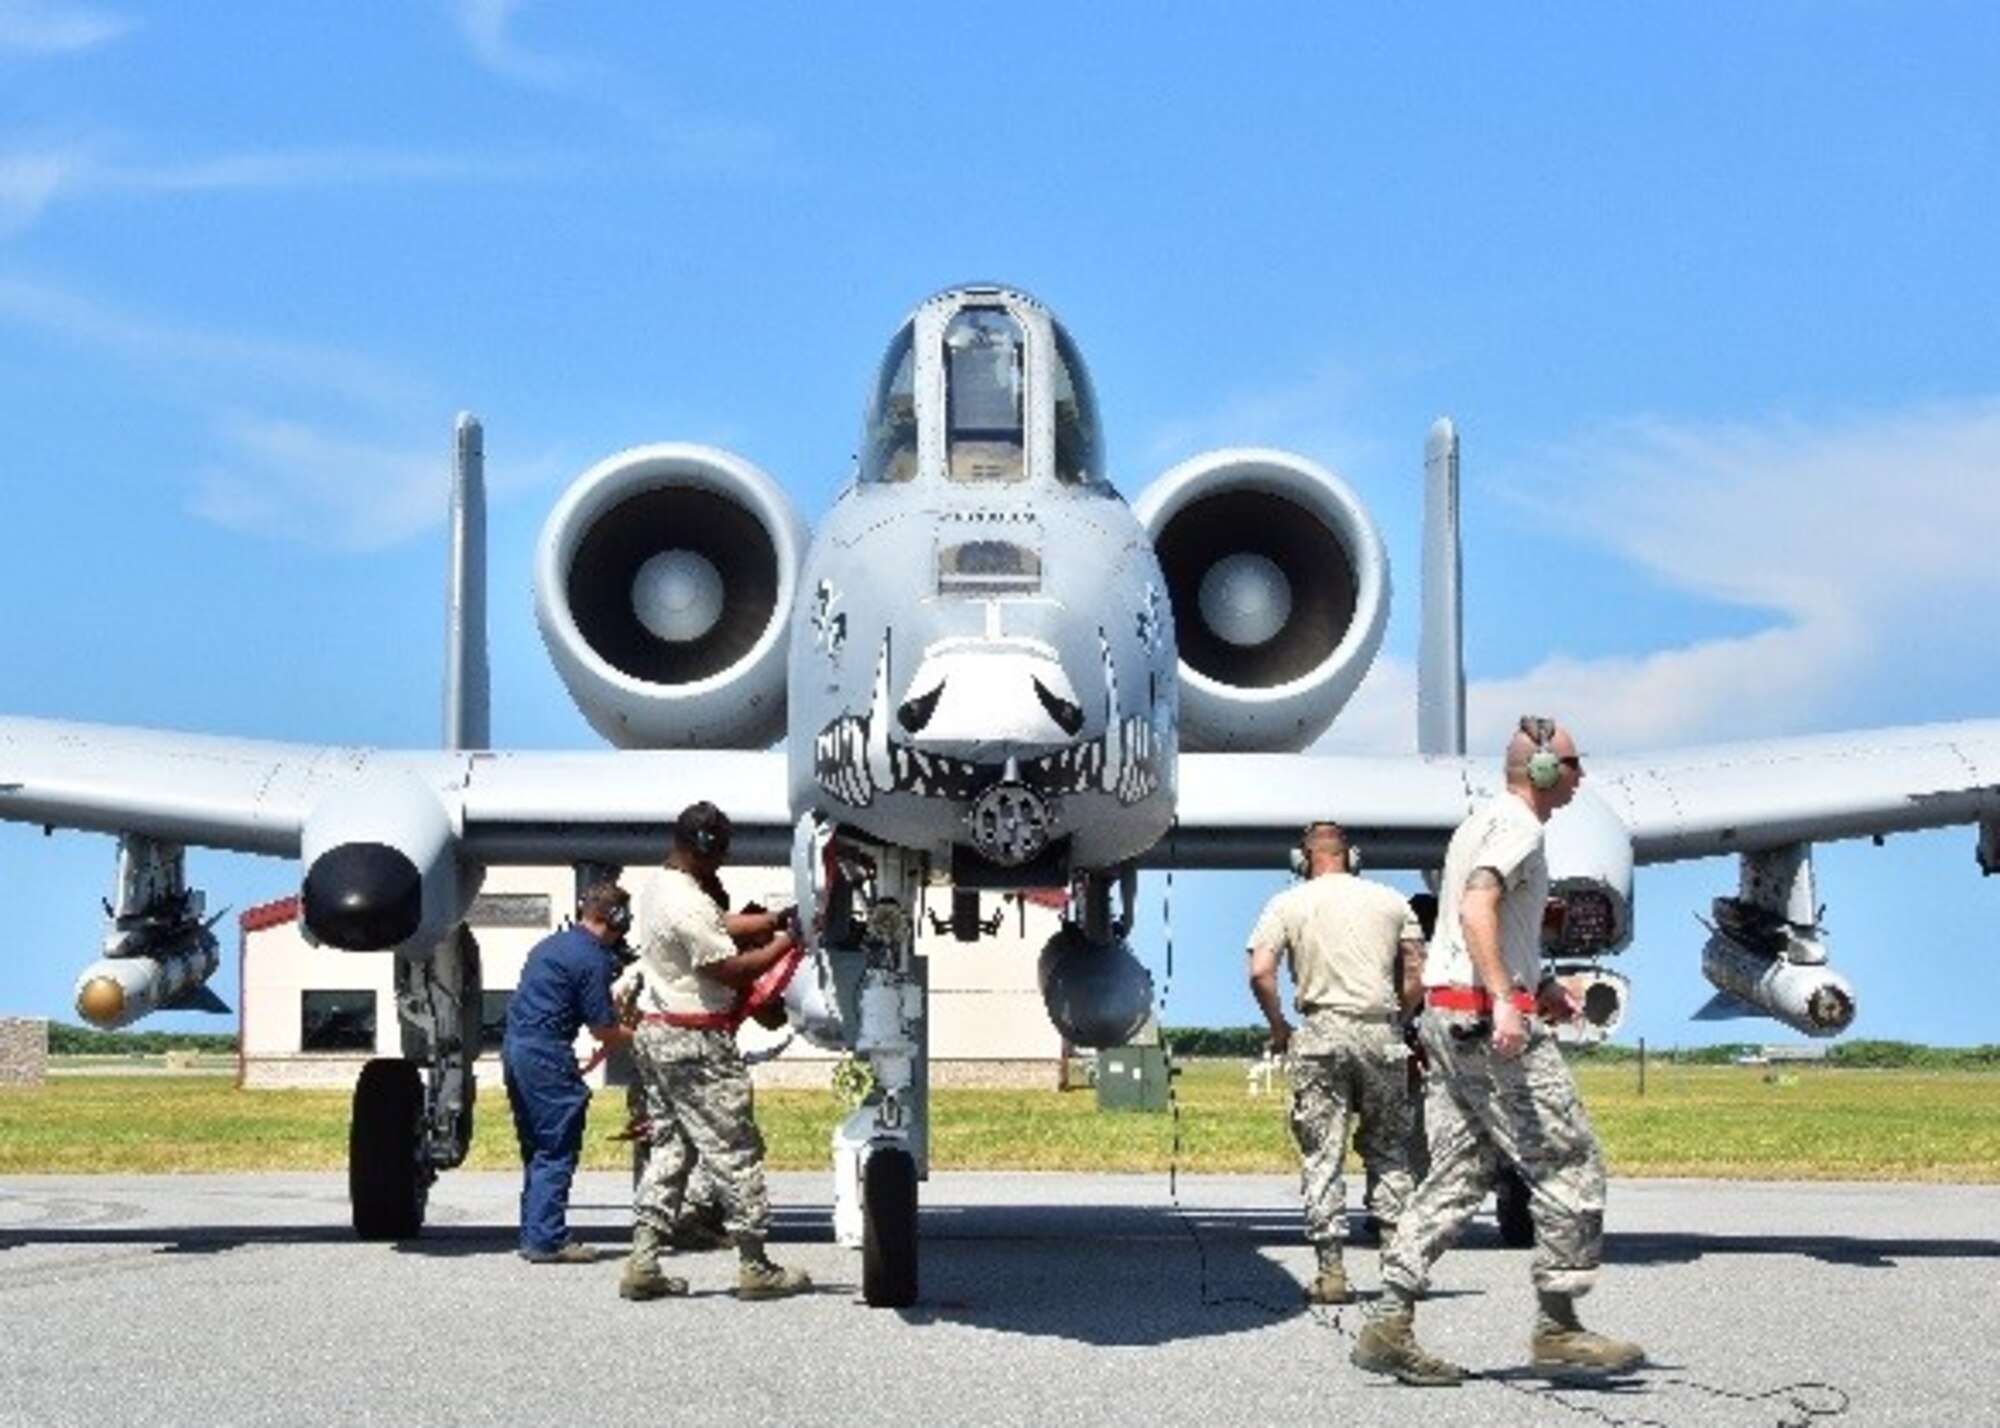 Airmen from the 924th Maintenance Squadron work on an A-10C Thunberbolt II as it arrives July 16 in preparation for their annual tour at Patrick Air Force Base, Fla. Citizen Airmen with the 924th Fighter Group, Davis-Monthan Air Force Base, Ariz. and the 920th Rescue Wing at Patrick AFB, are training together to perfect skills needed during combat.